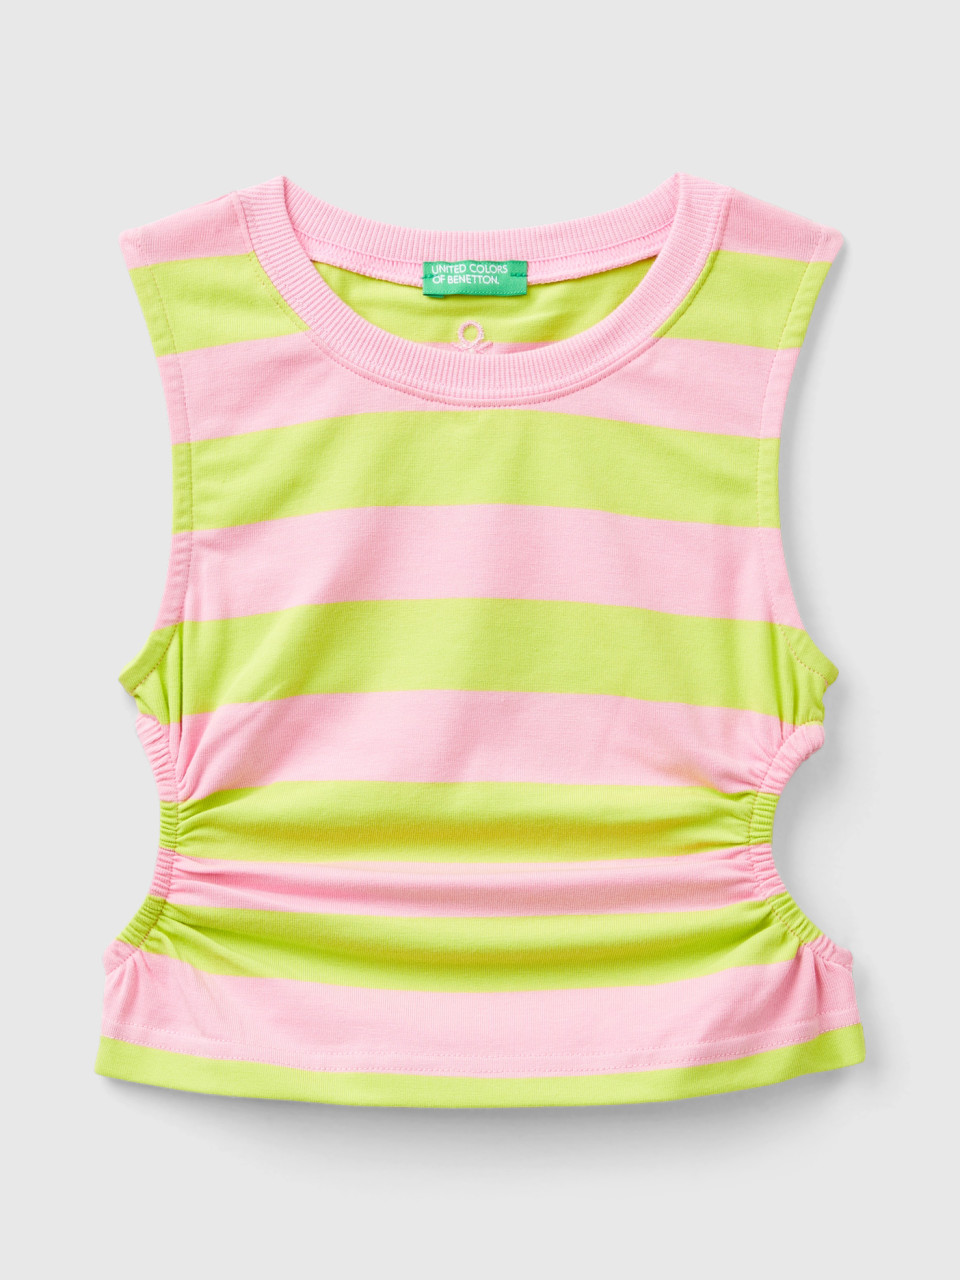 Benetton, Striped Top With Porthole, Multi-color, Kids